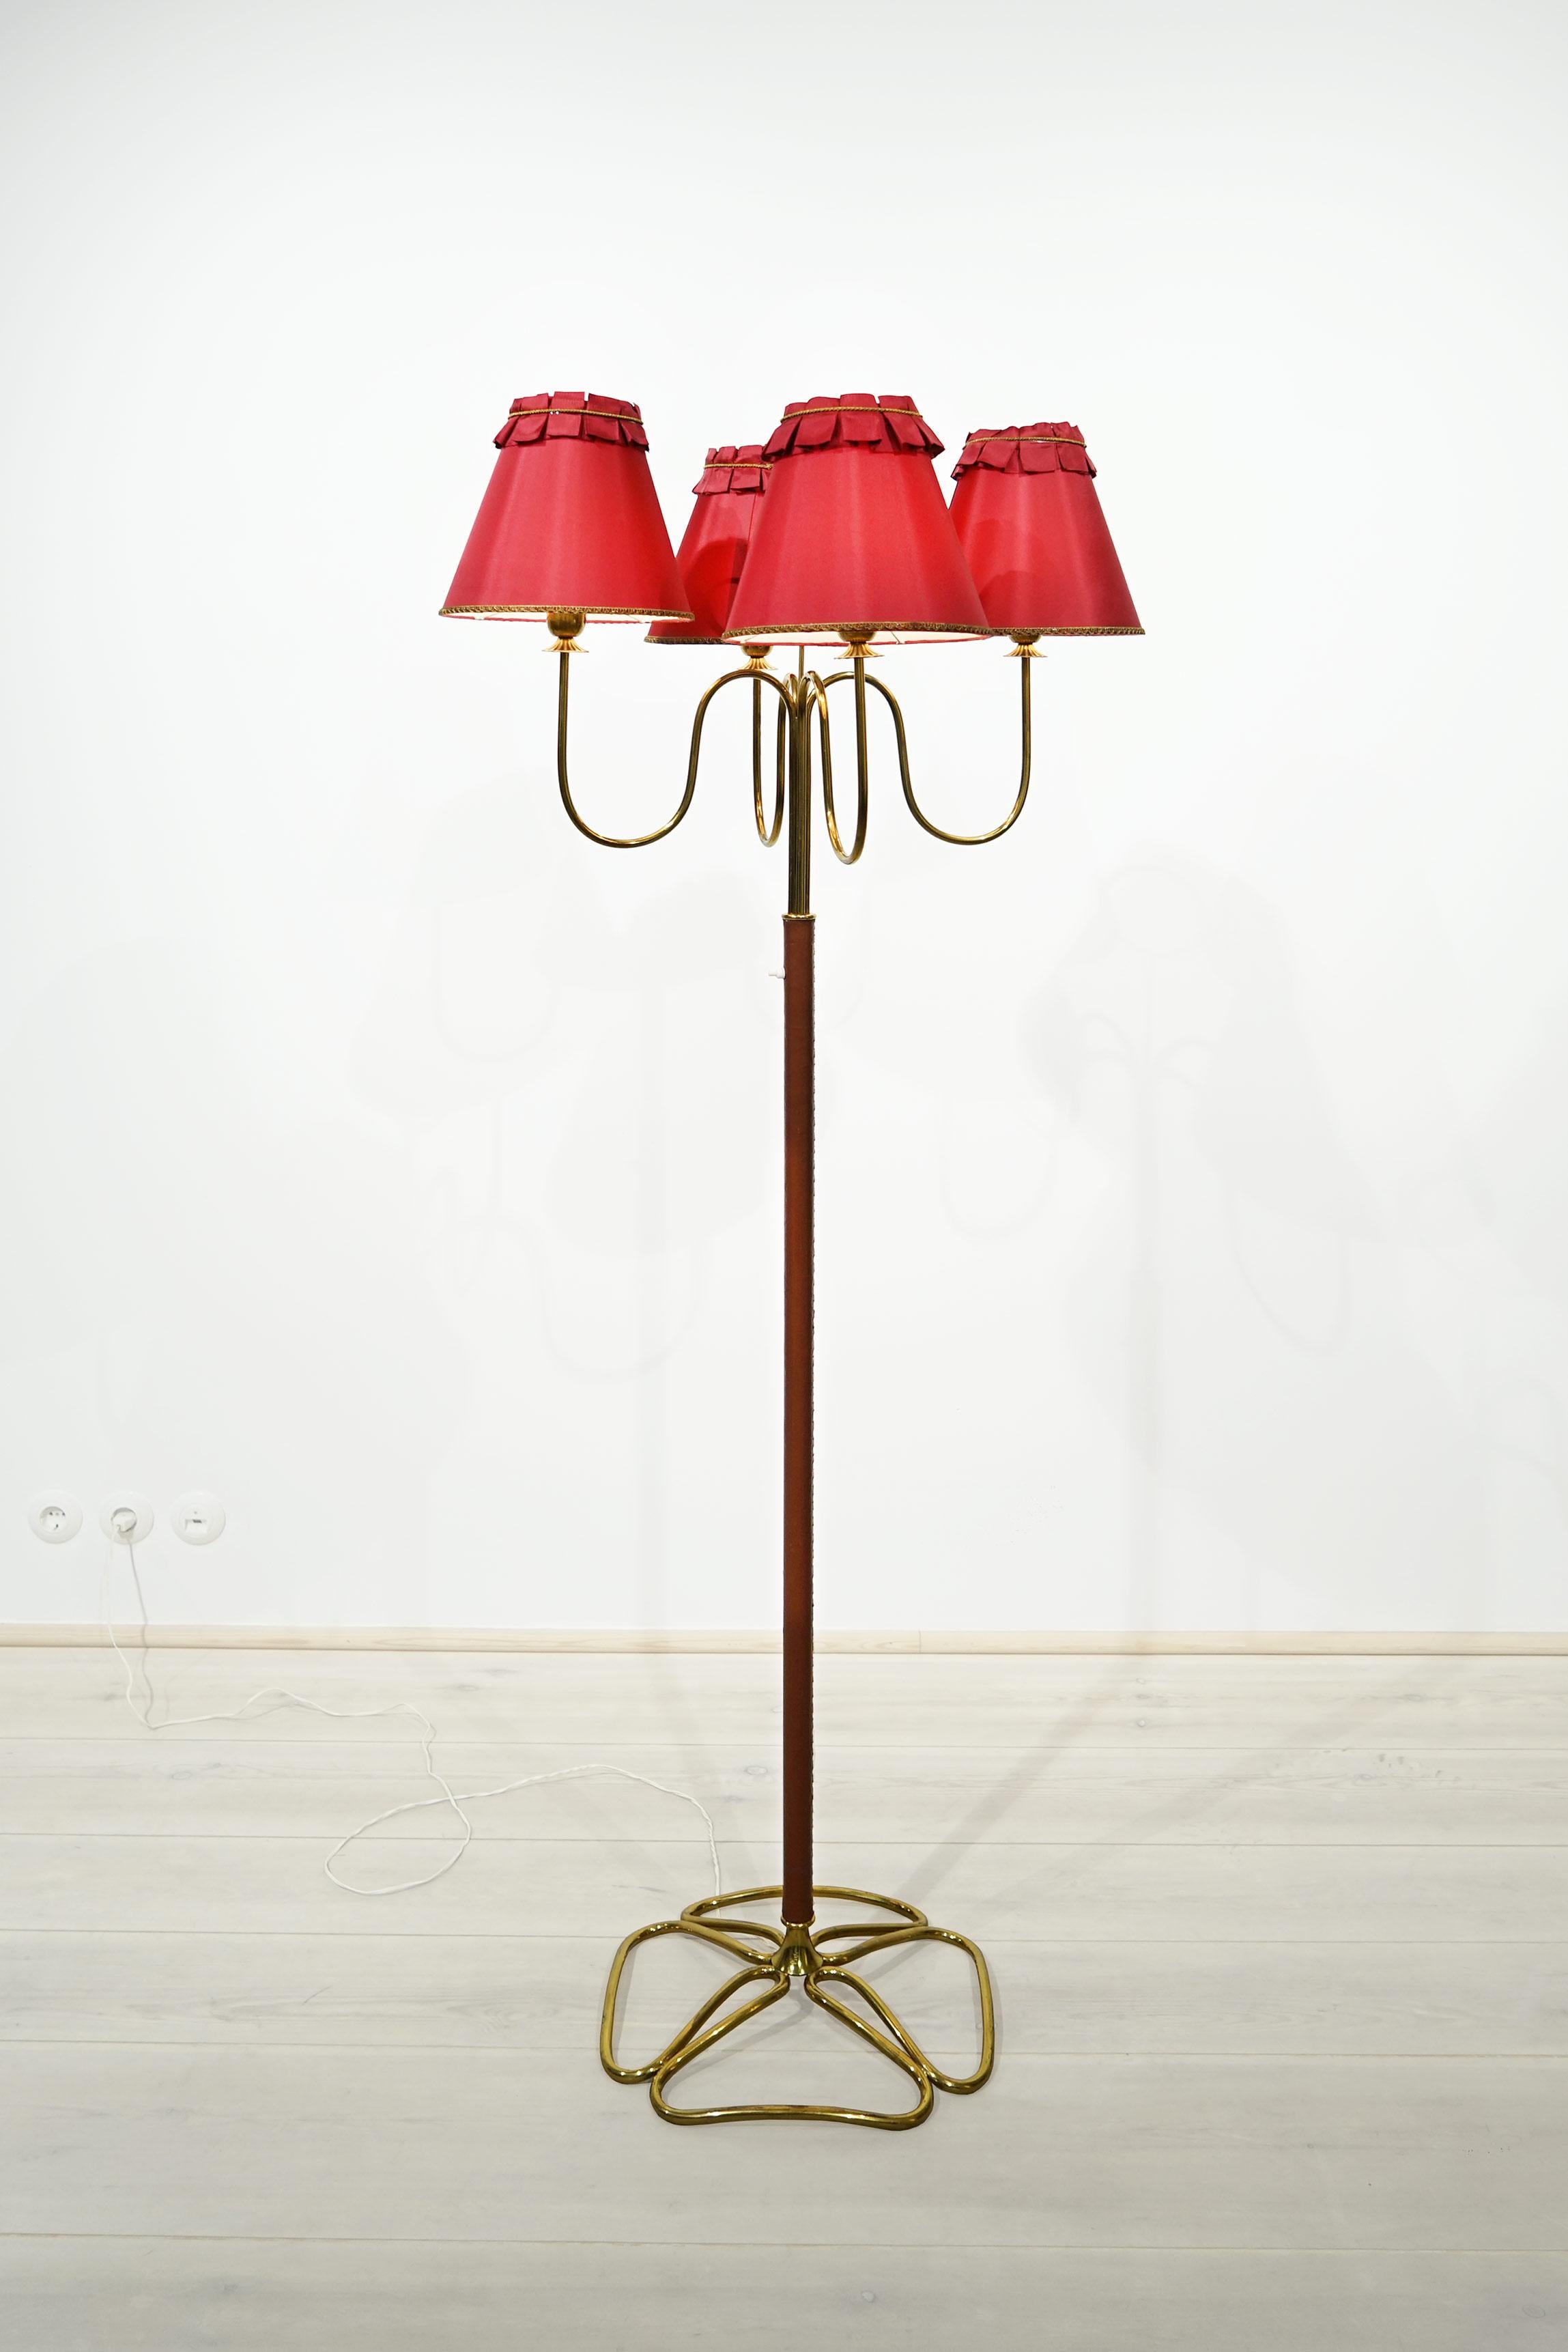 Floor lamp model no. 1032 by Gino Sarfatti 1948, Arteluce, Italy.

Gino Sarfatti (1912 in Venice; † 1984 in Gravedona) was an Italian Industrial designer. He is considered one of the most important designers of luminaires and lamps in the 20th